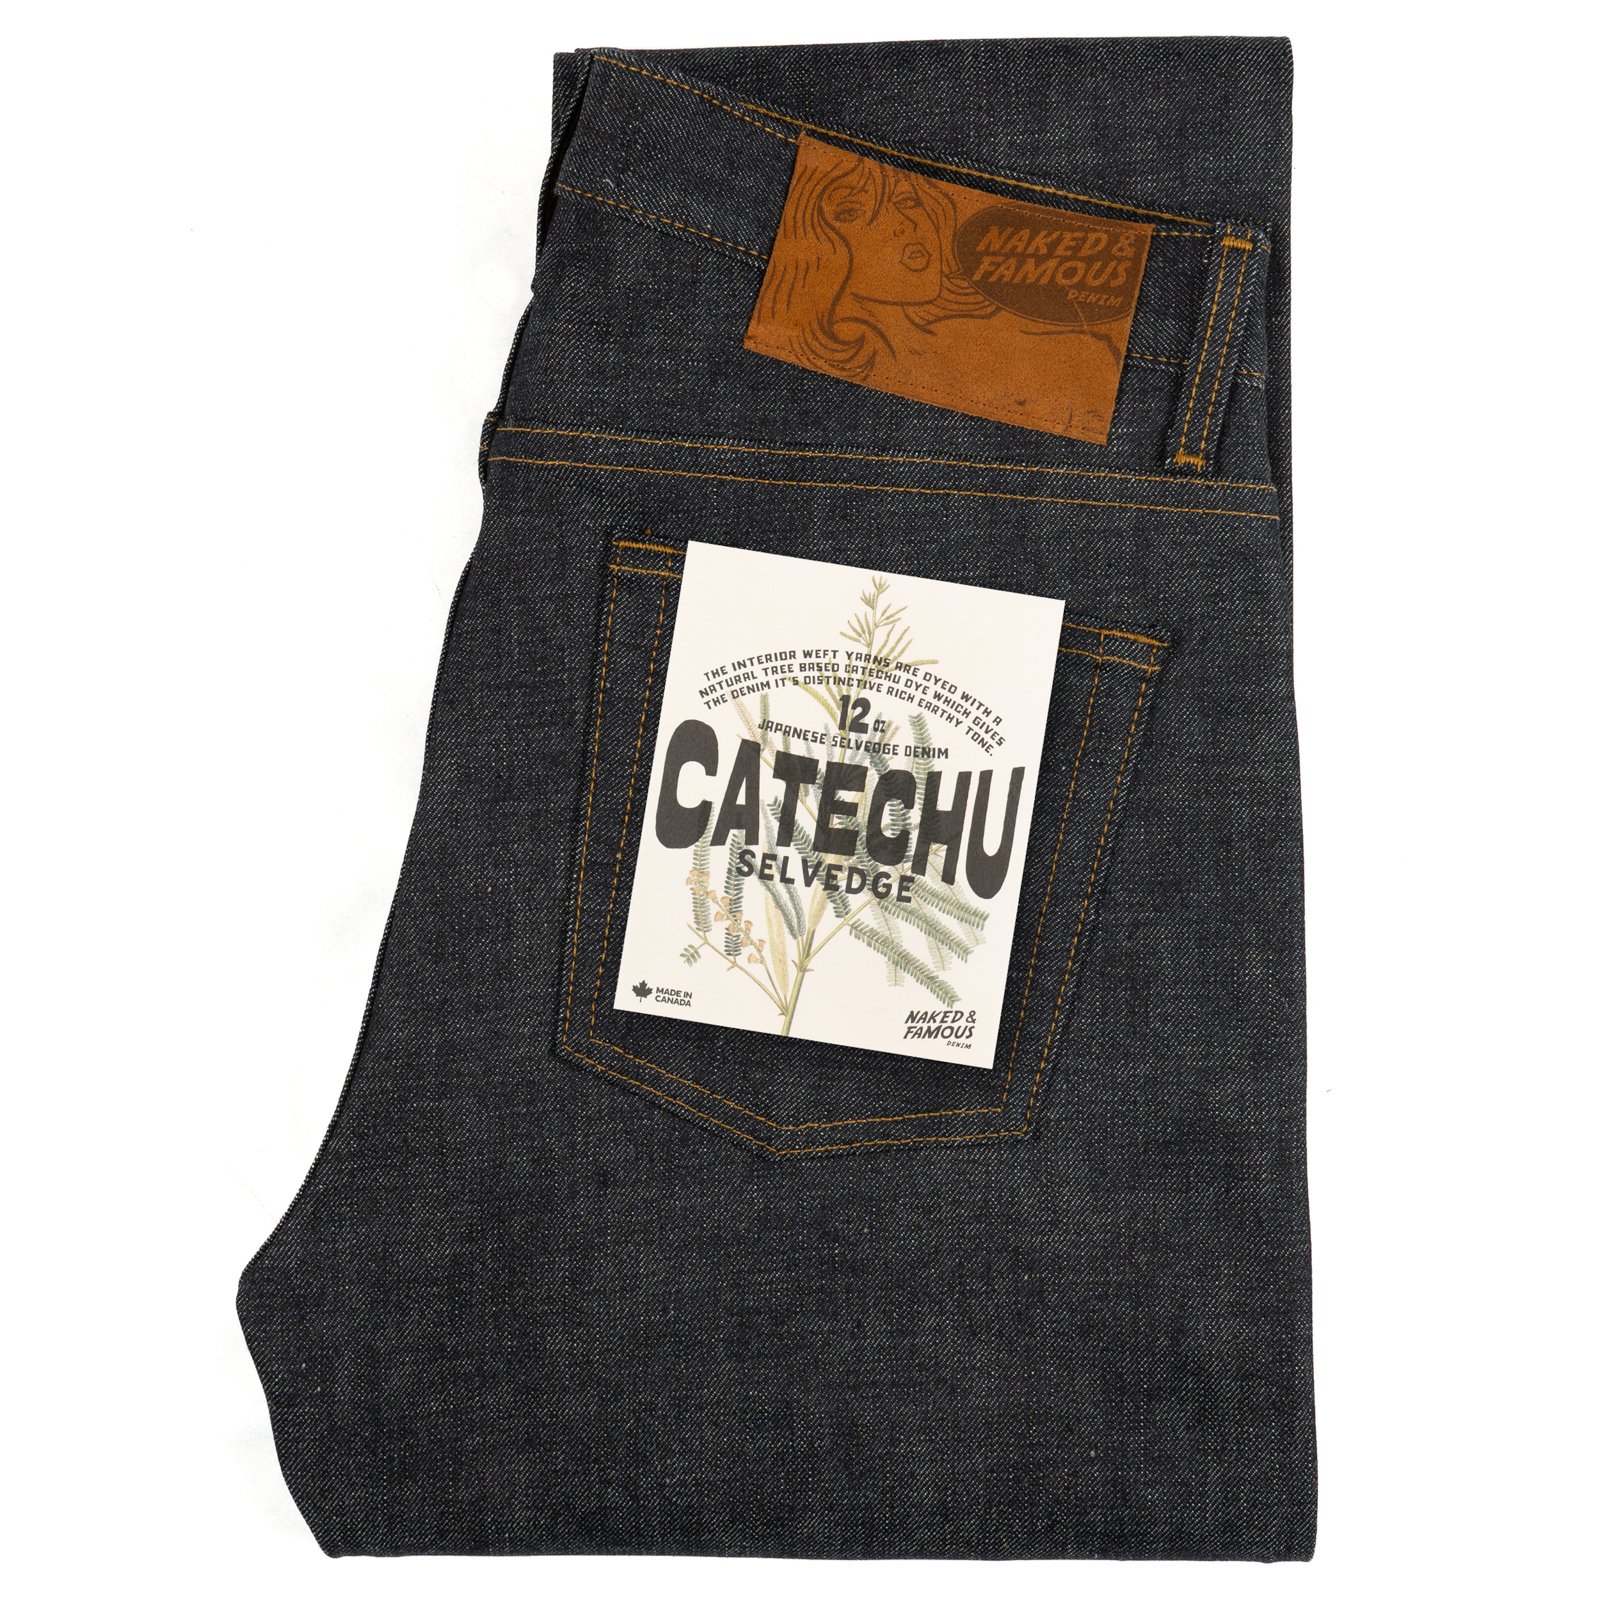  Catechu Selvedge jeans - folded 